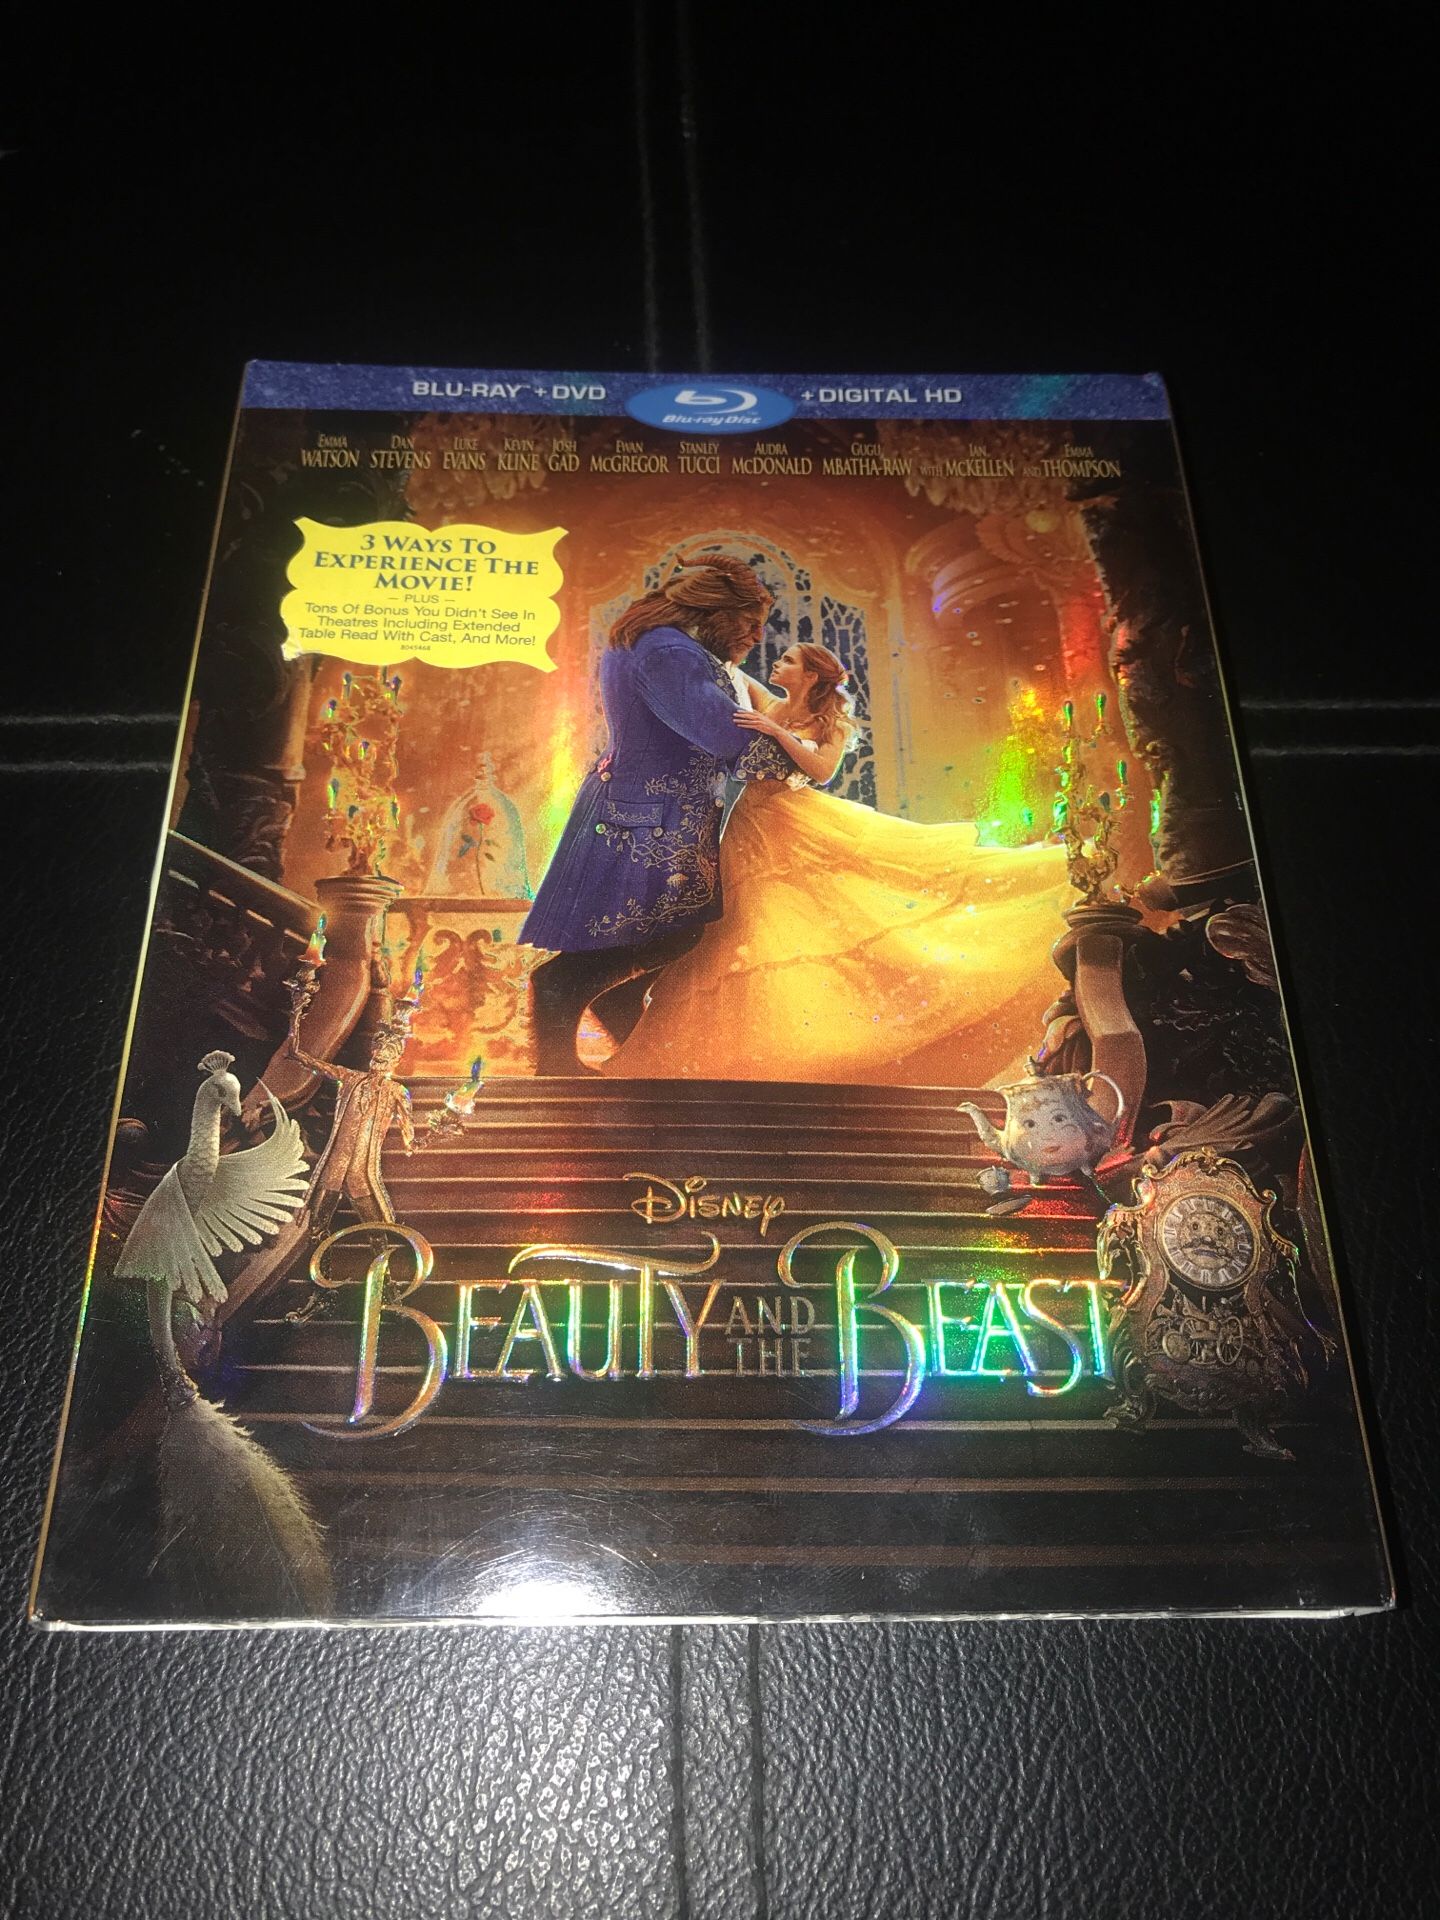 The Beauty and the Beast Blu-ray DVD digital copy